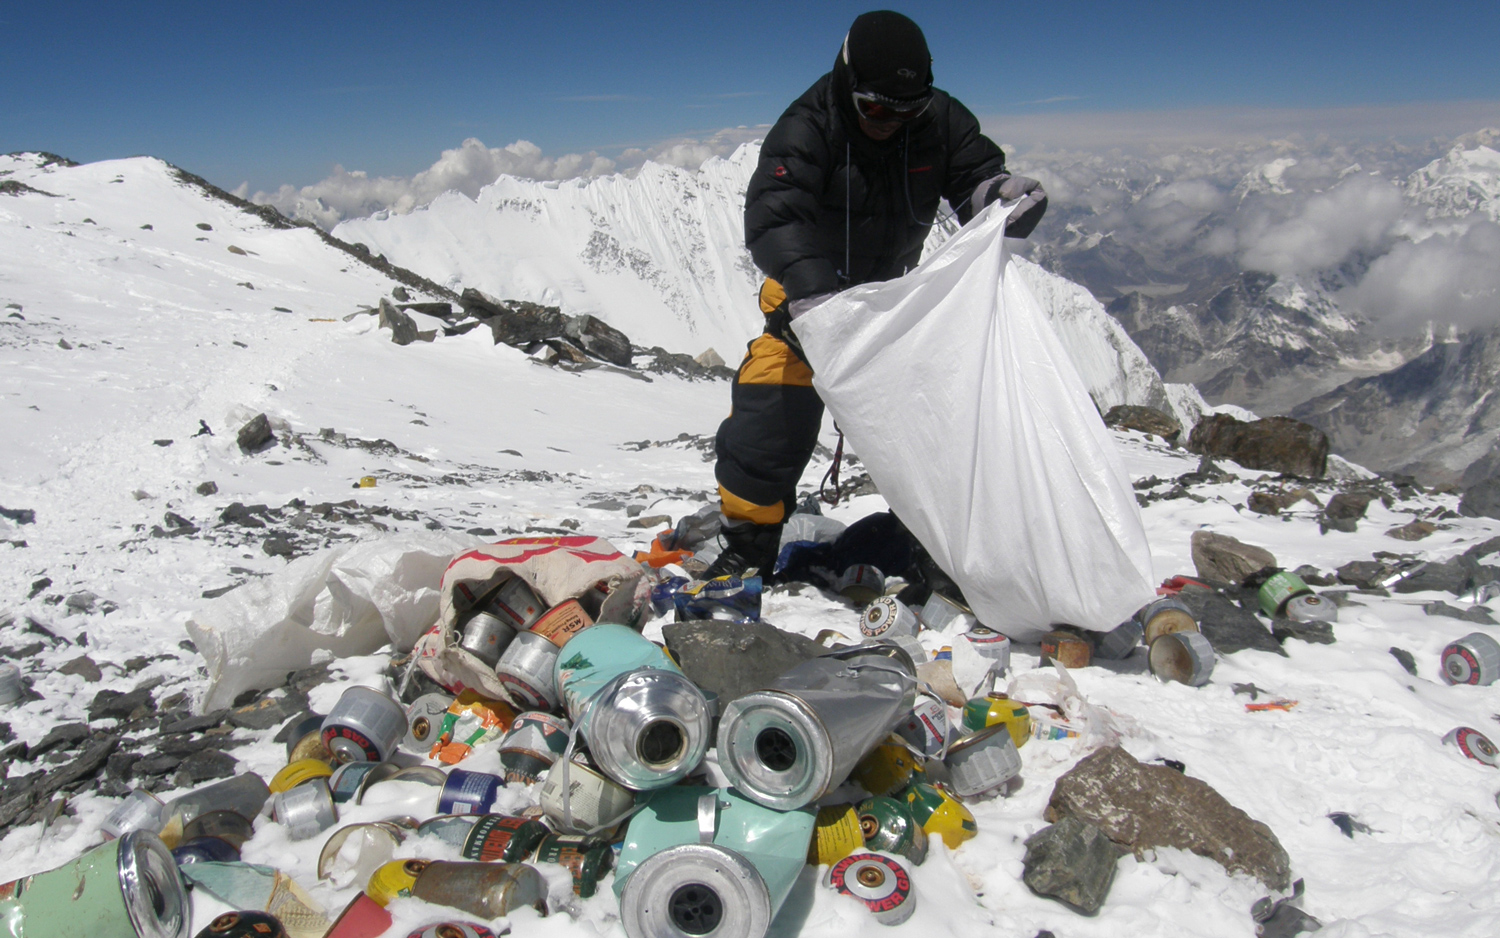 Littering haunts even the Everest: Nepal decides to make art with trash left on mount